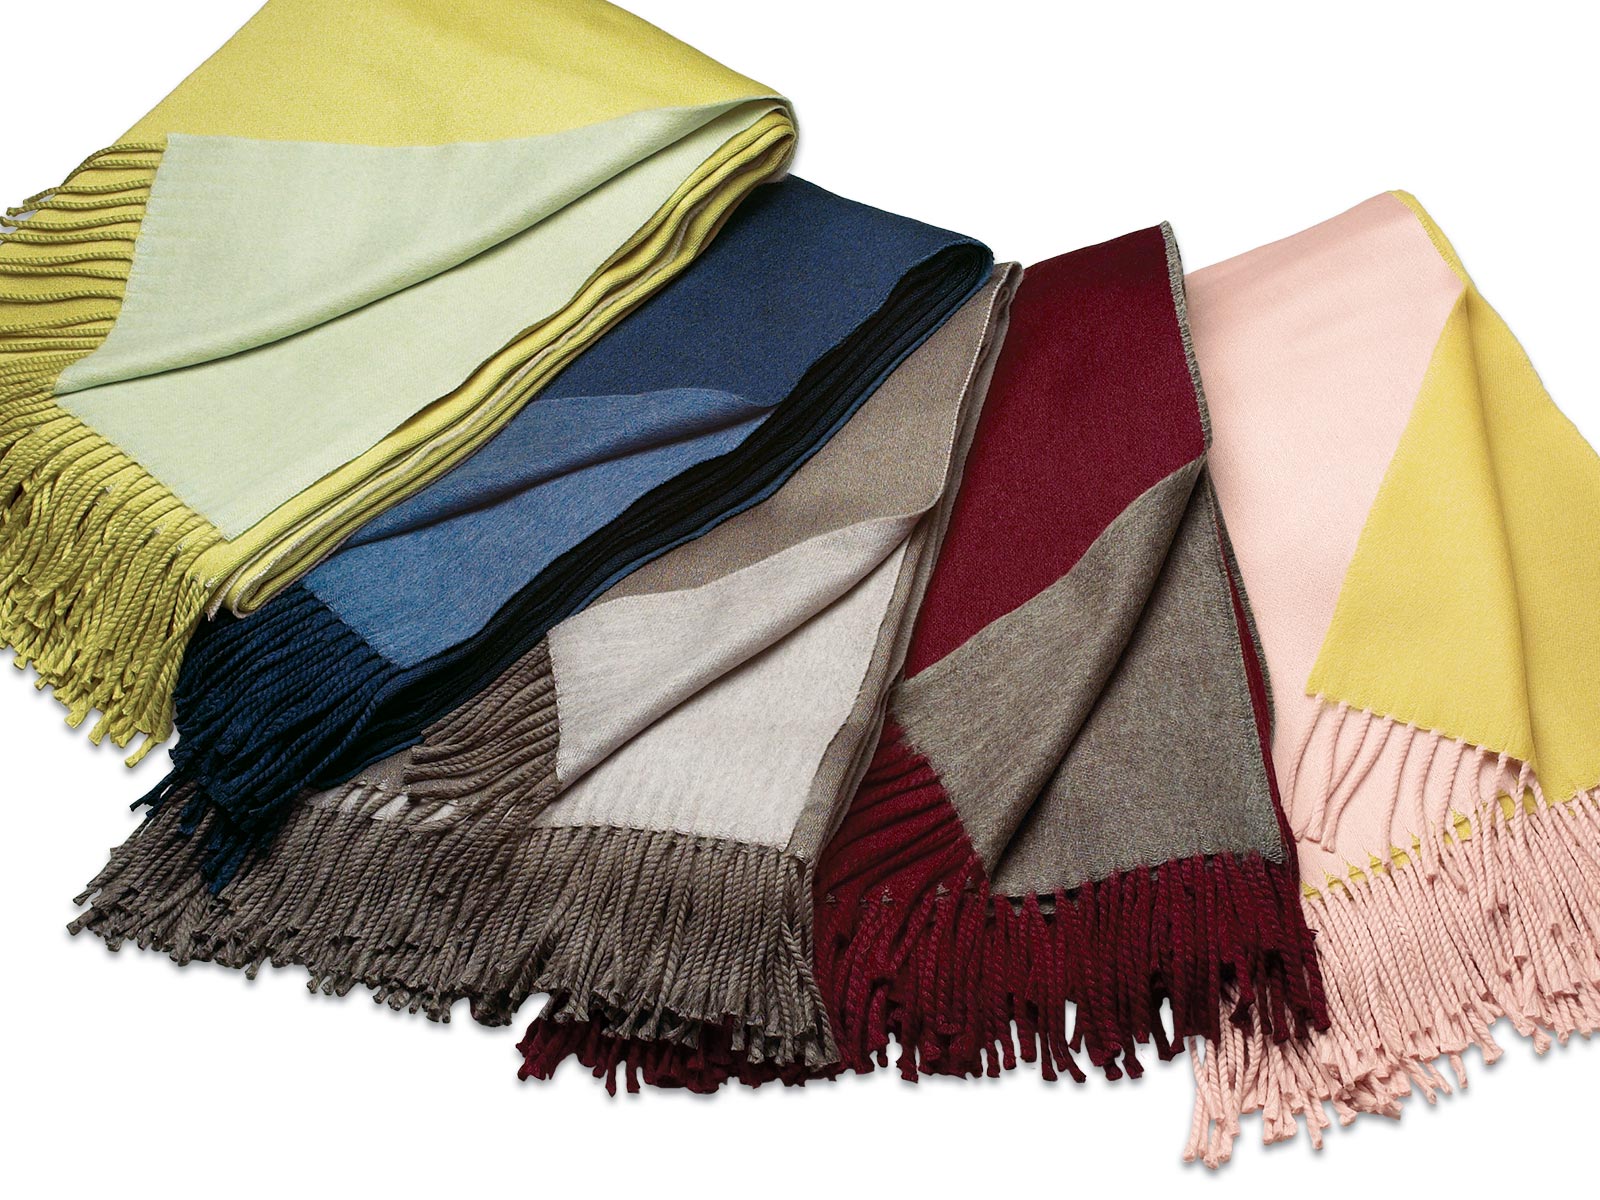 Borges Cashmere Throw: Yellowgreen/Mint, Navy/Sky Blue, Mocha/Taupe, Burgundy/Taupe, Yellowgreen/Pink